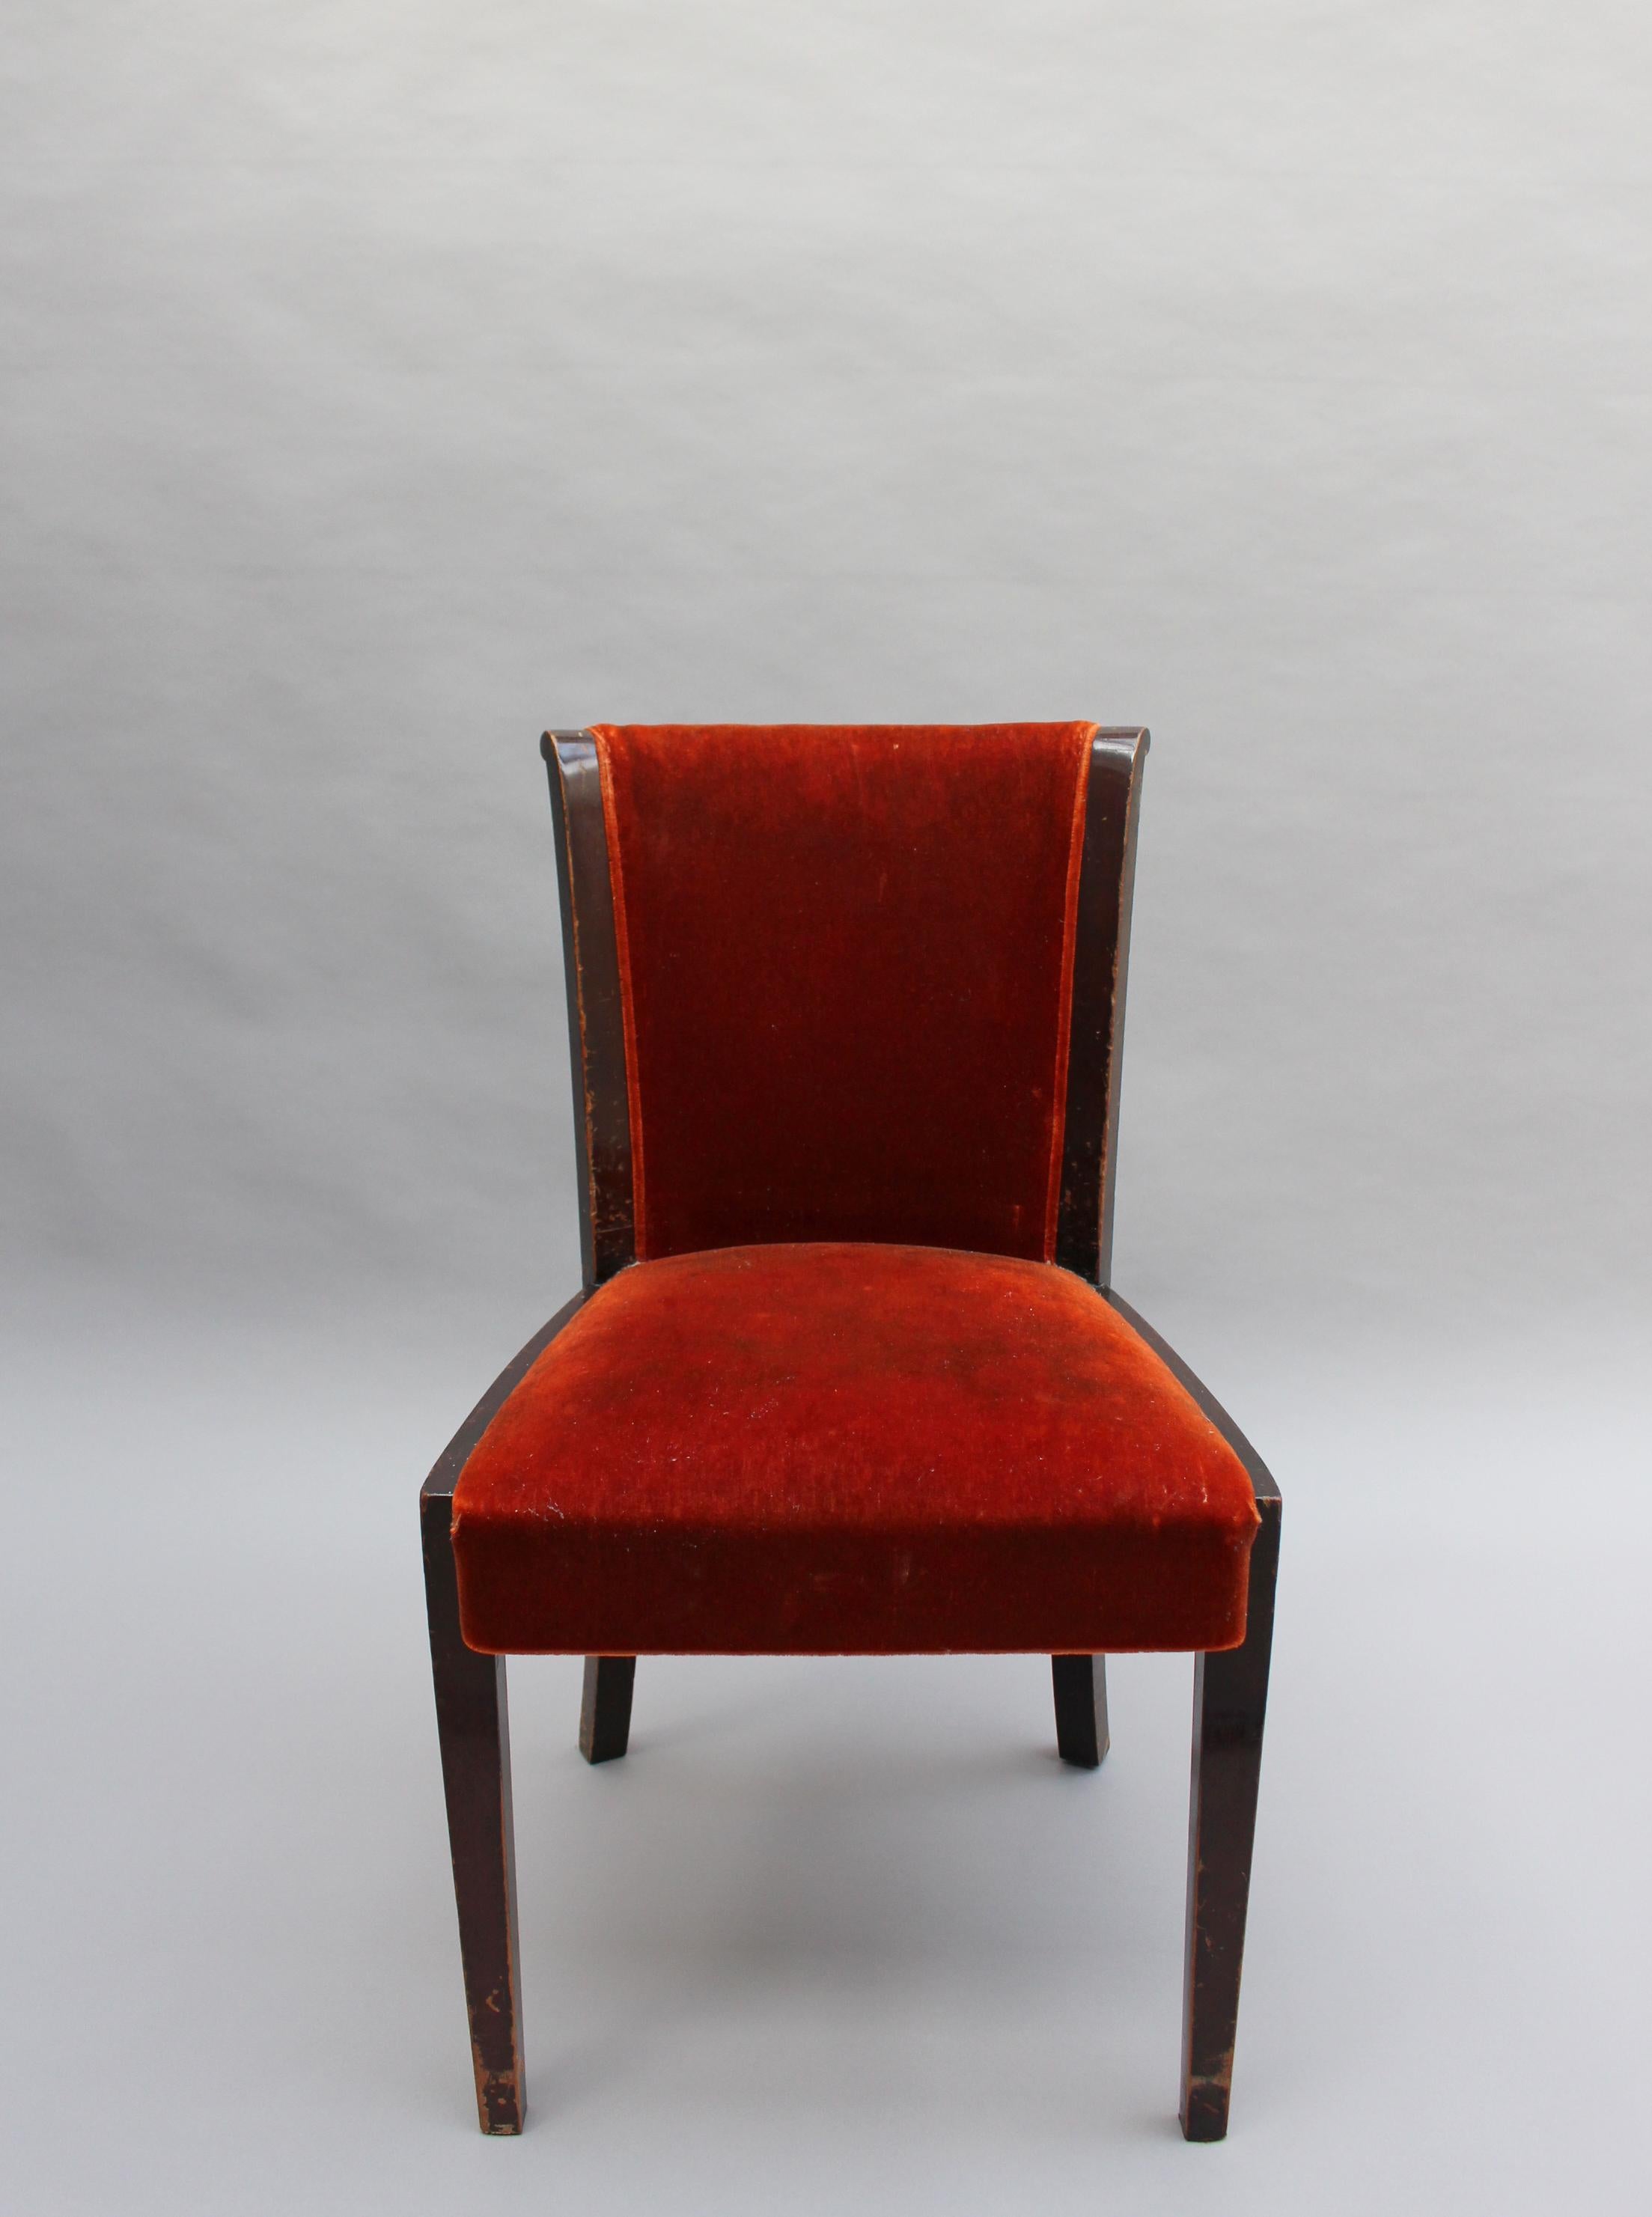 Mahogany Set of 6 Fine Belgium Art Deco Chairs by De Coene (4 Side and 2 Arm) For Sale